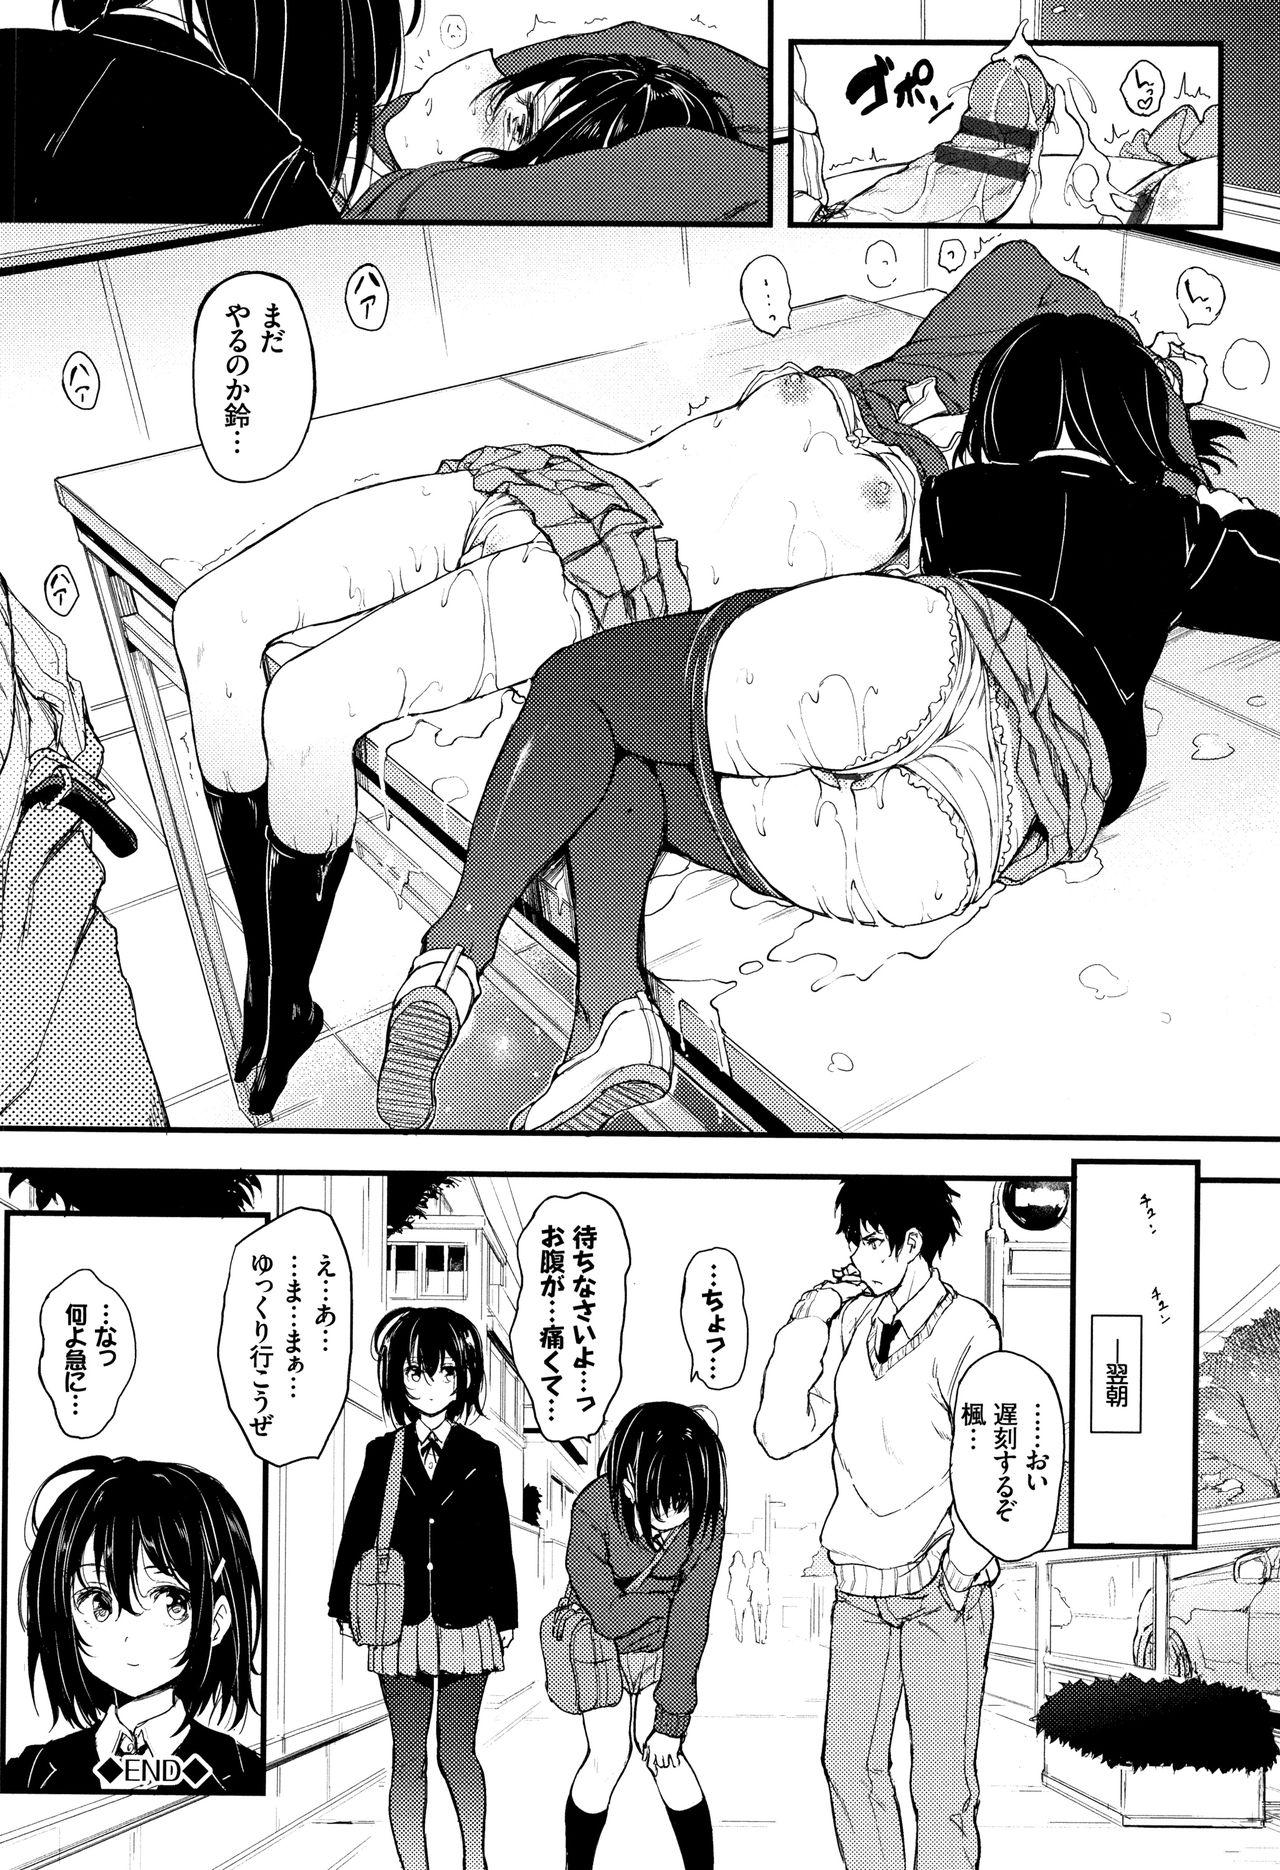 Kaede to Suzu Ch.1-3 Page 24 Of 72.